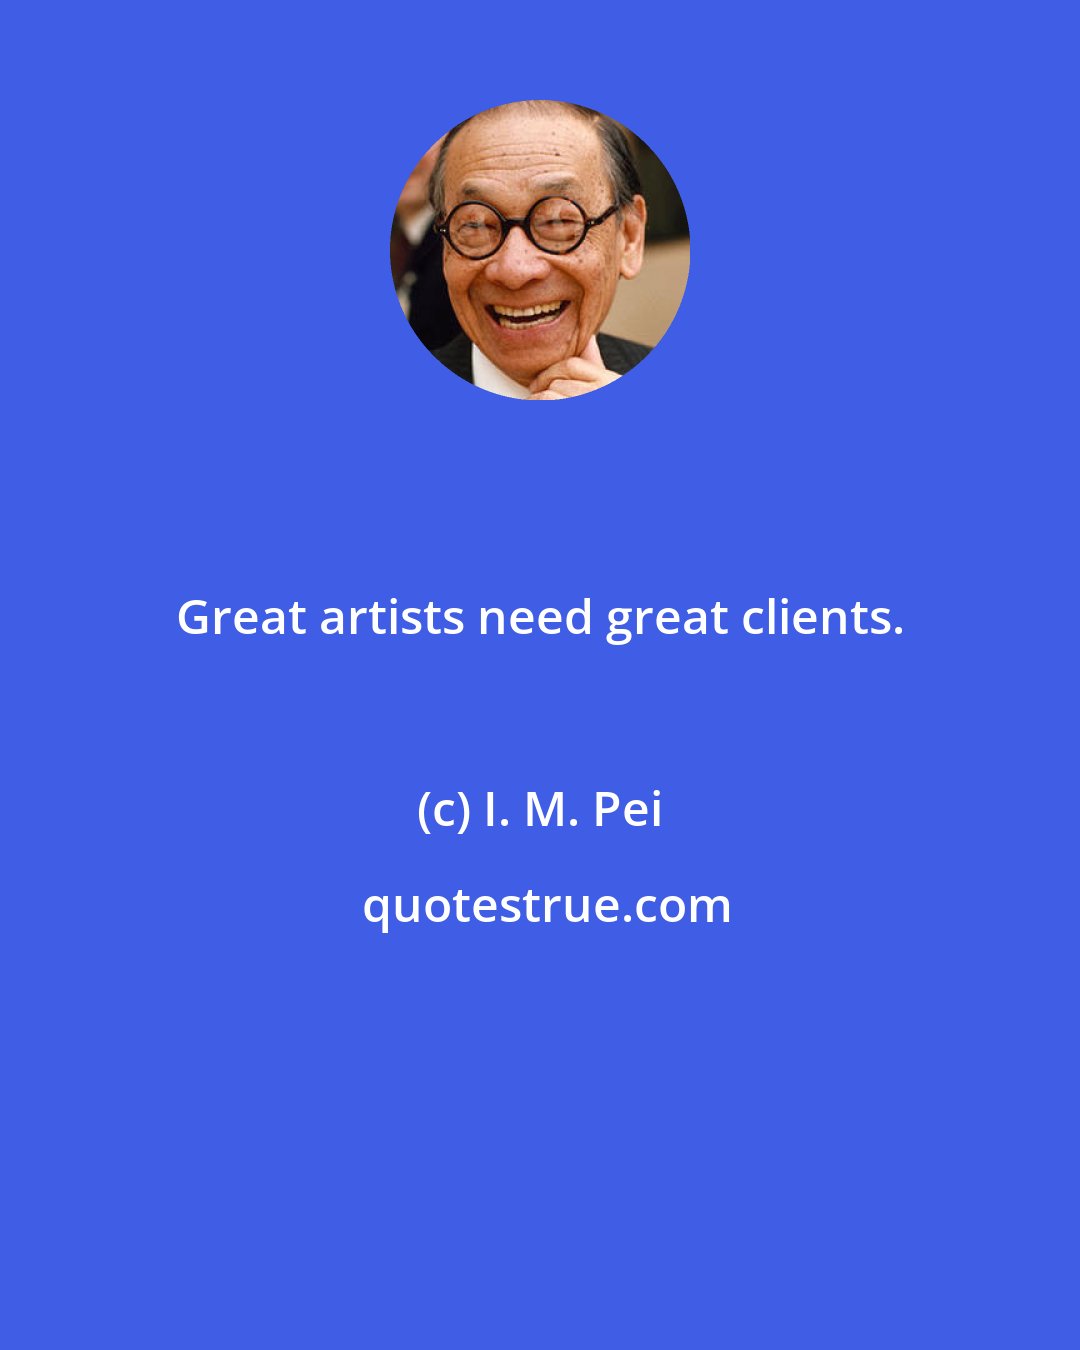 I. M. Pei: Great artists need great clients.